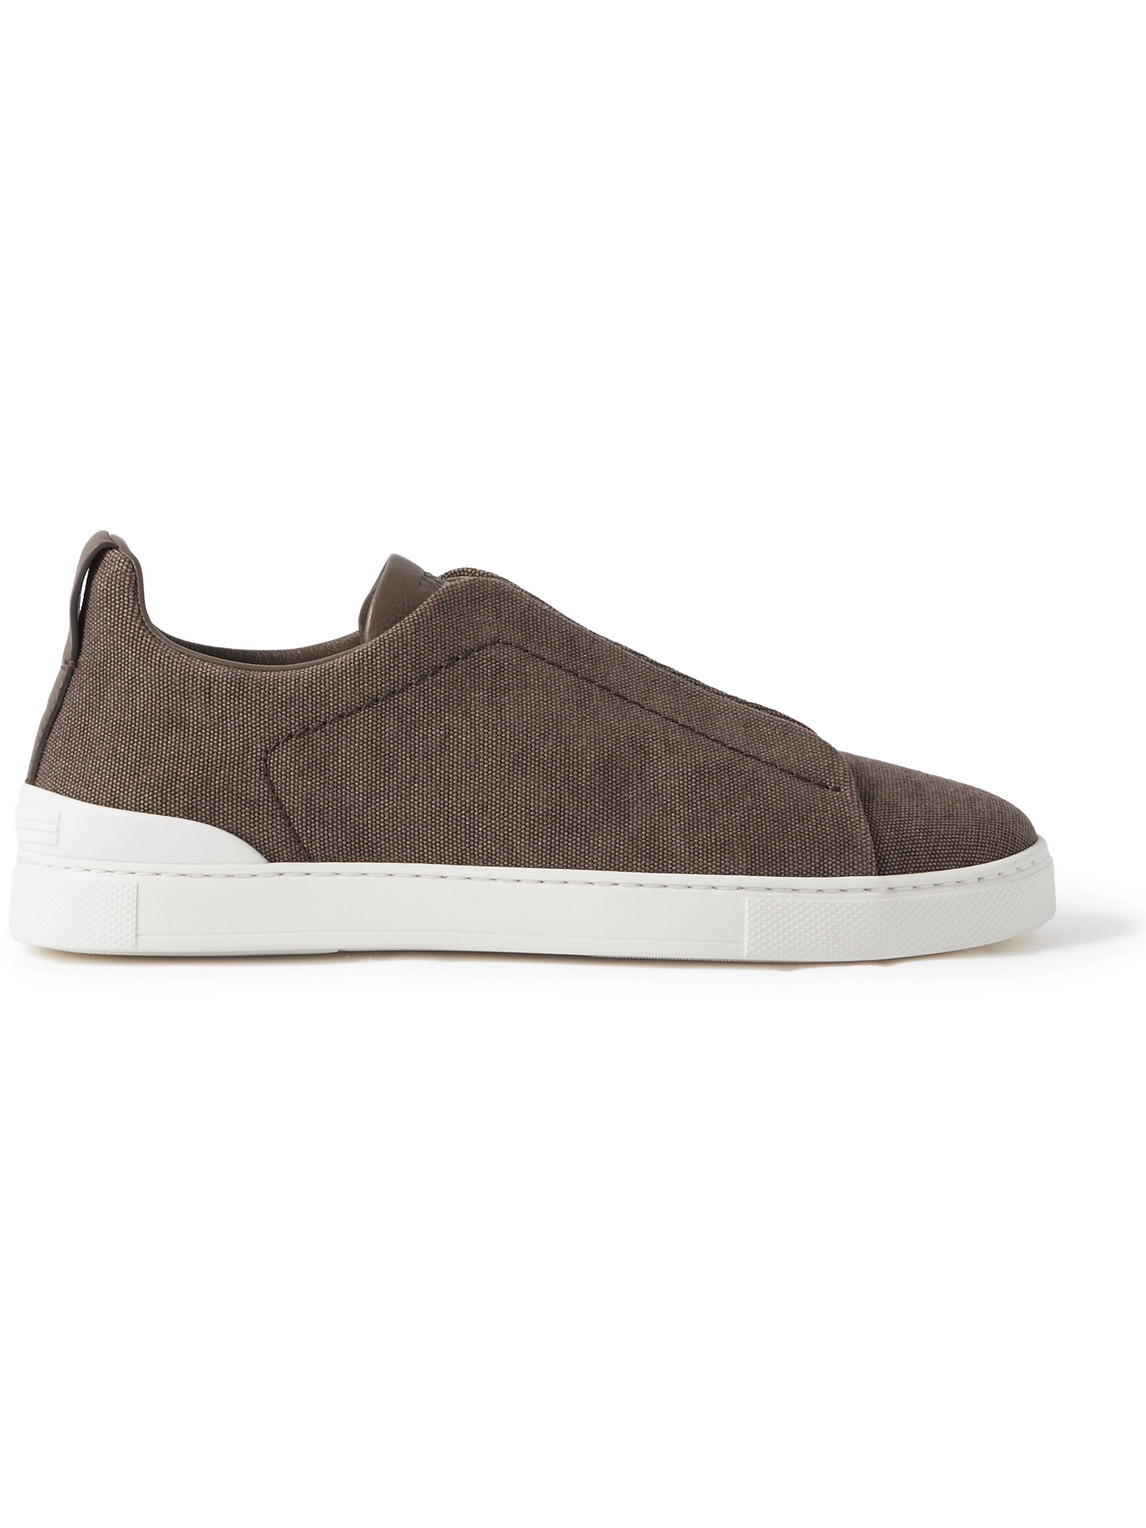 Zegna Triple Stitch Leather-trimmed Canvas Sneakers In Brown